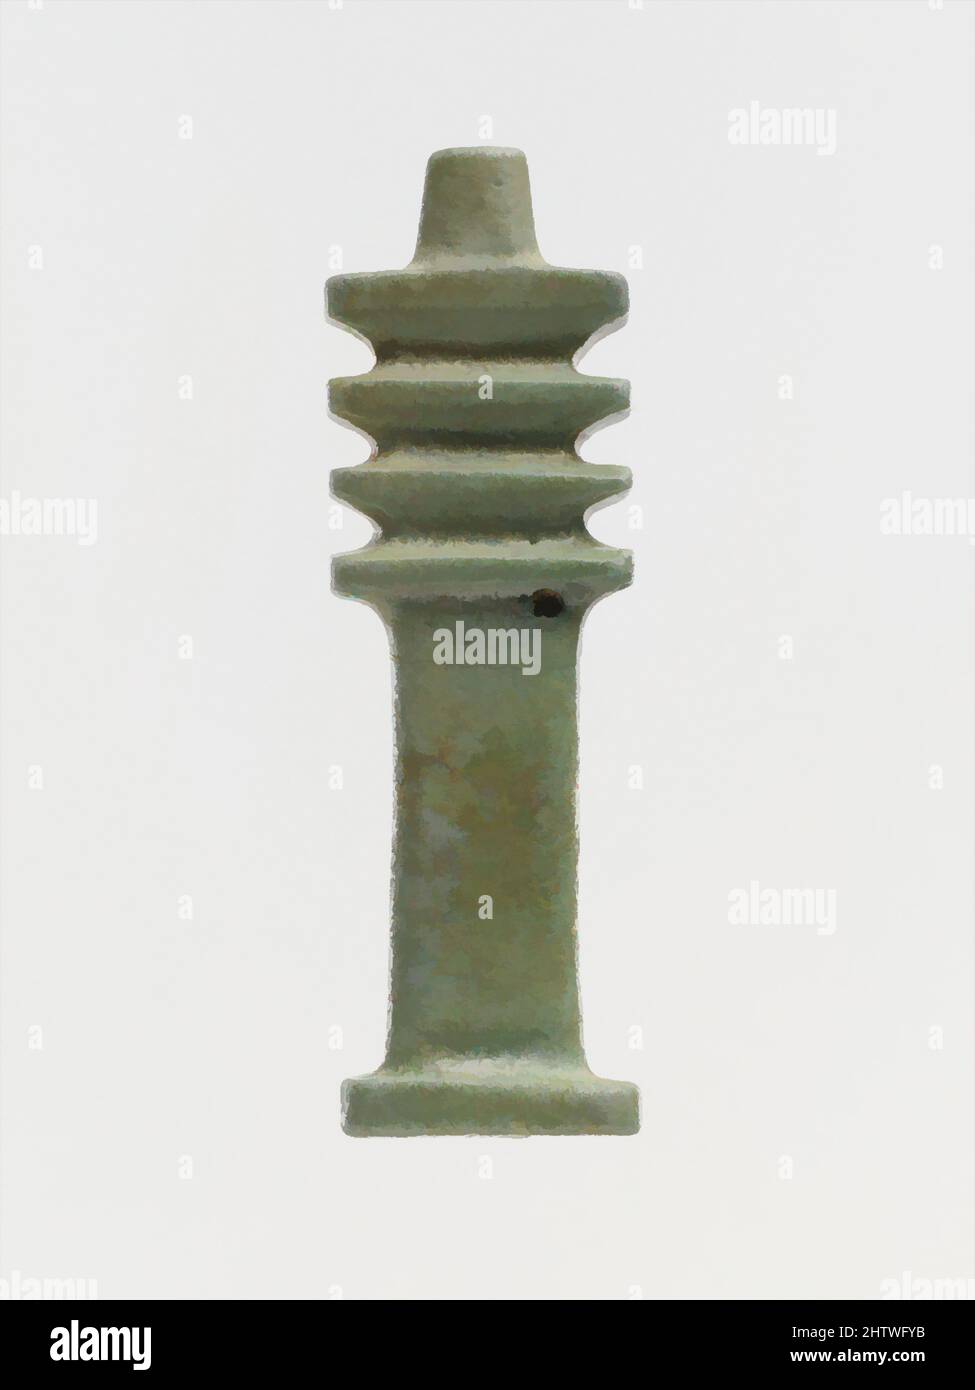 Art inspired by Faience djed-pillar amulet, Late Dynastic–Hellenistic, 664–30 B.C., Egyptian, Clay, glazed, H.: 1 3/4 in. (4.5 cm), Gold and Silver, Symbolic objects used for amulets include a menat-pendant, the djed-sign, and a papyrus capital, all common in Egyptian architecture. A, Classic works modernized by Artotop with a splash of modernity. Shapes, color and value, eye-catching visual impact on art. Emotions through freedom of artworks in a contemporary way. A timeless message pursuing a wildly creative new direction. Artists turning to the digital medium and creating the Artotop NFT Stock Photo